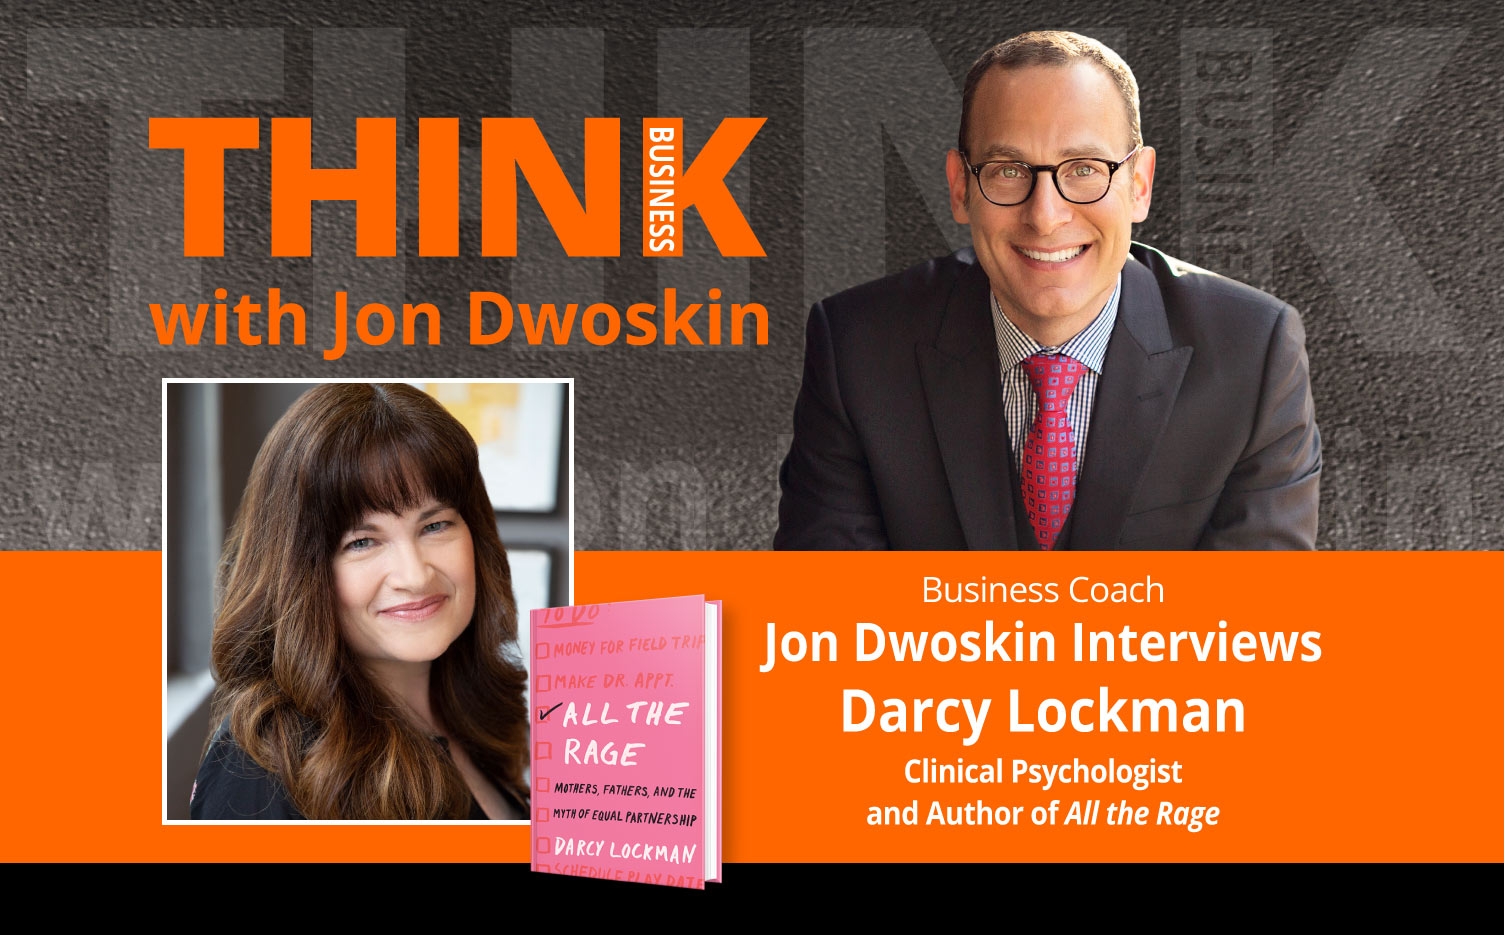 THINK Business Podcast: Jon Dwoskin Interviews Darcy Lockman, Clinical Psychologist and Author of All the Rage